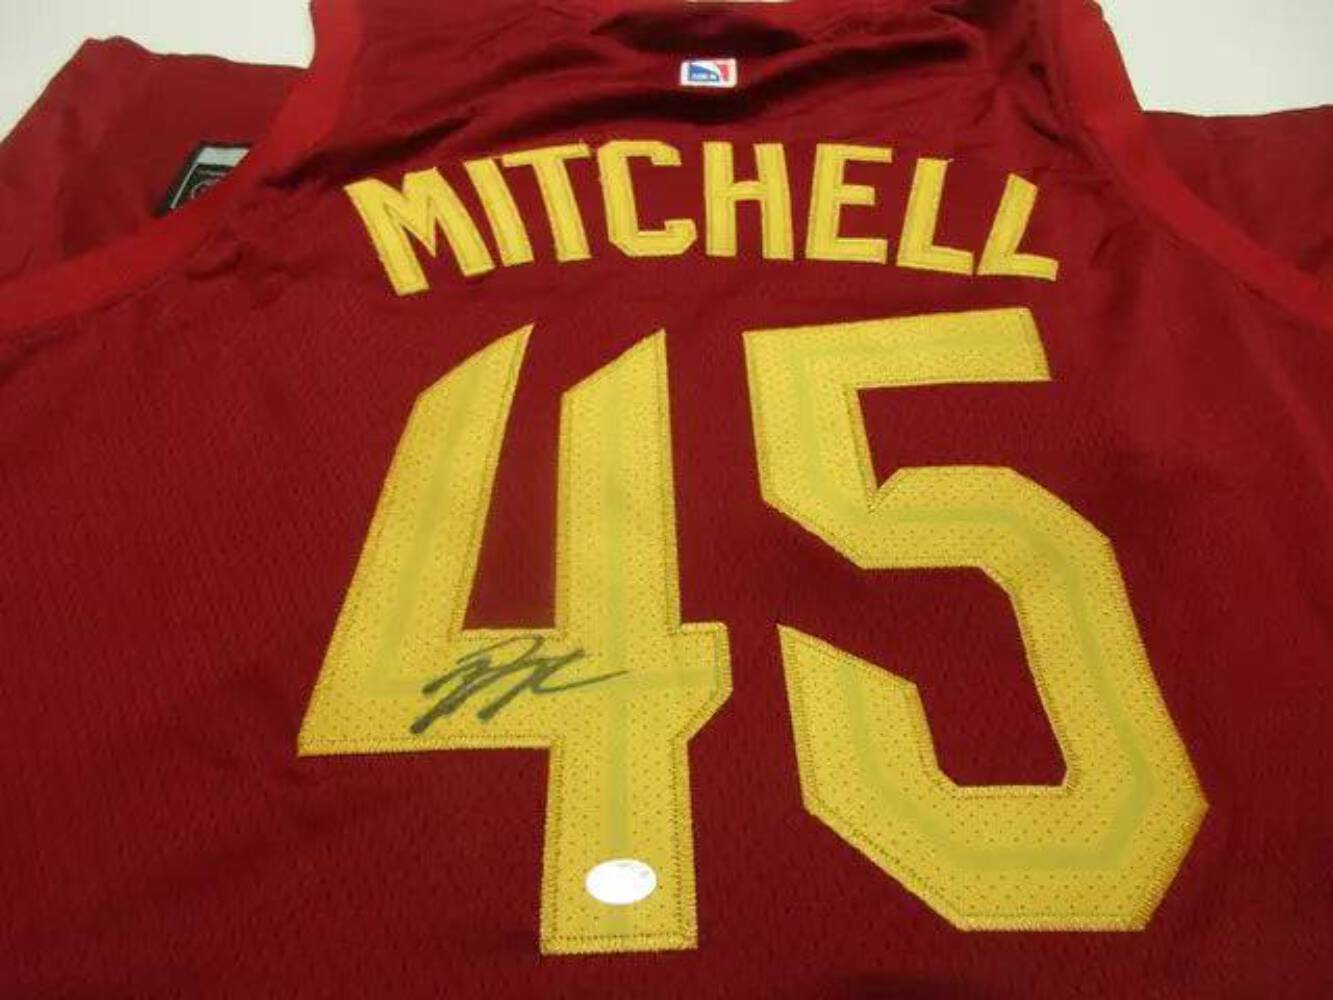 Donovan Mitchell of the Cleveland Cavaliers signed autographed basketball jersey